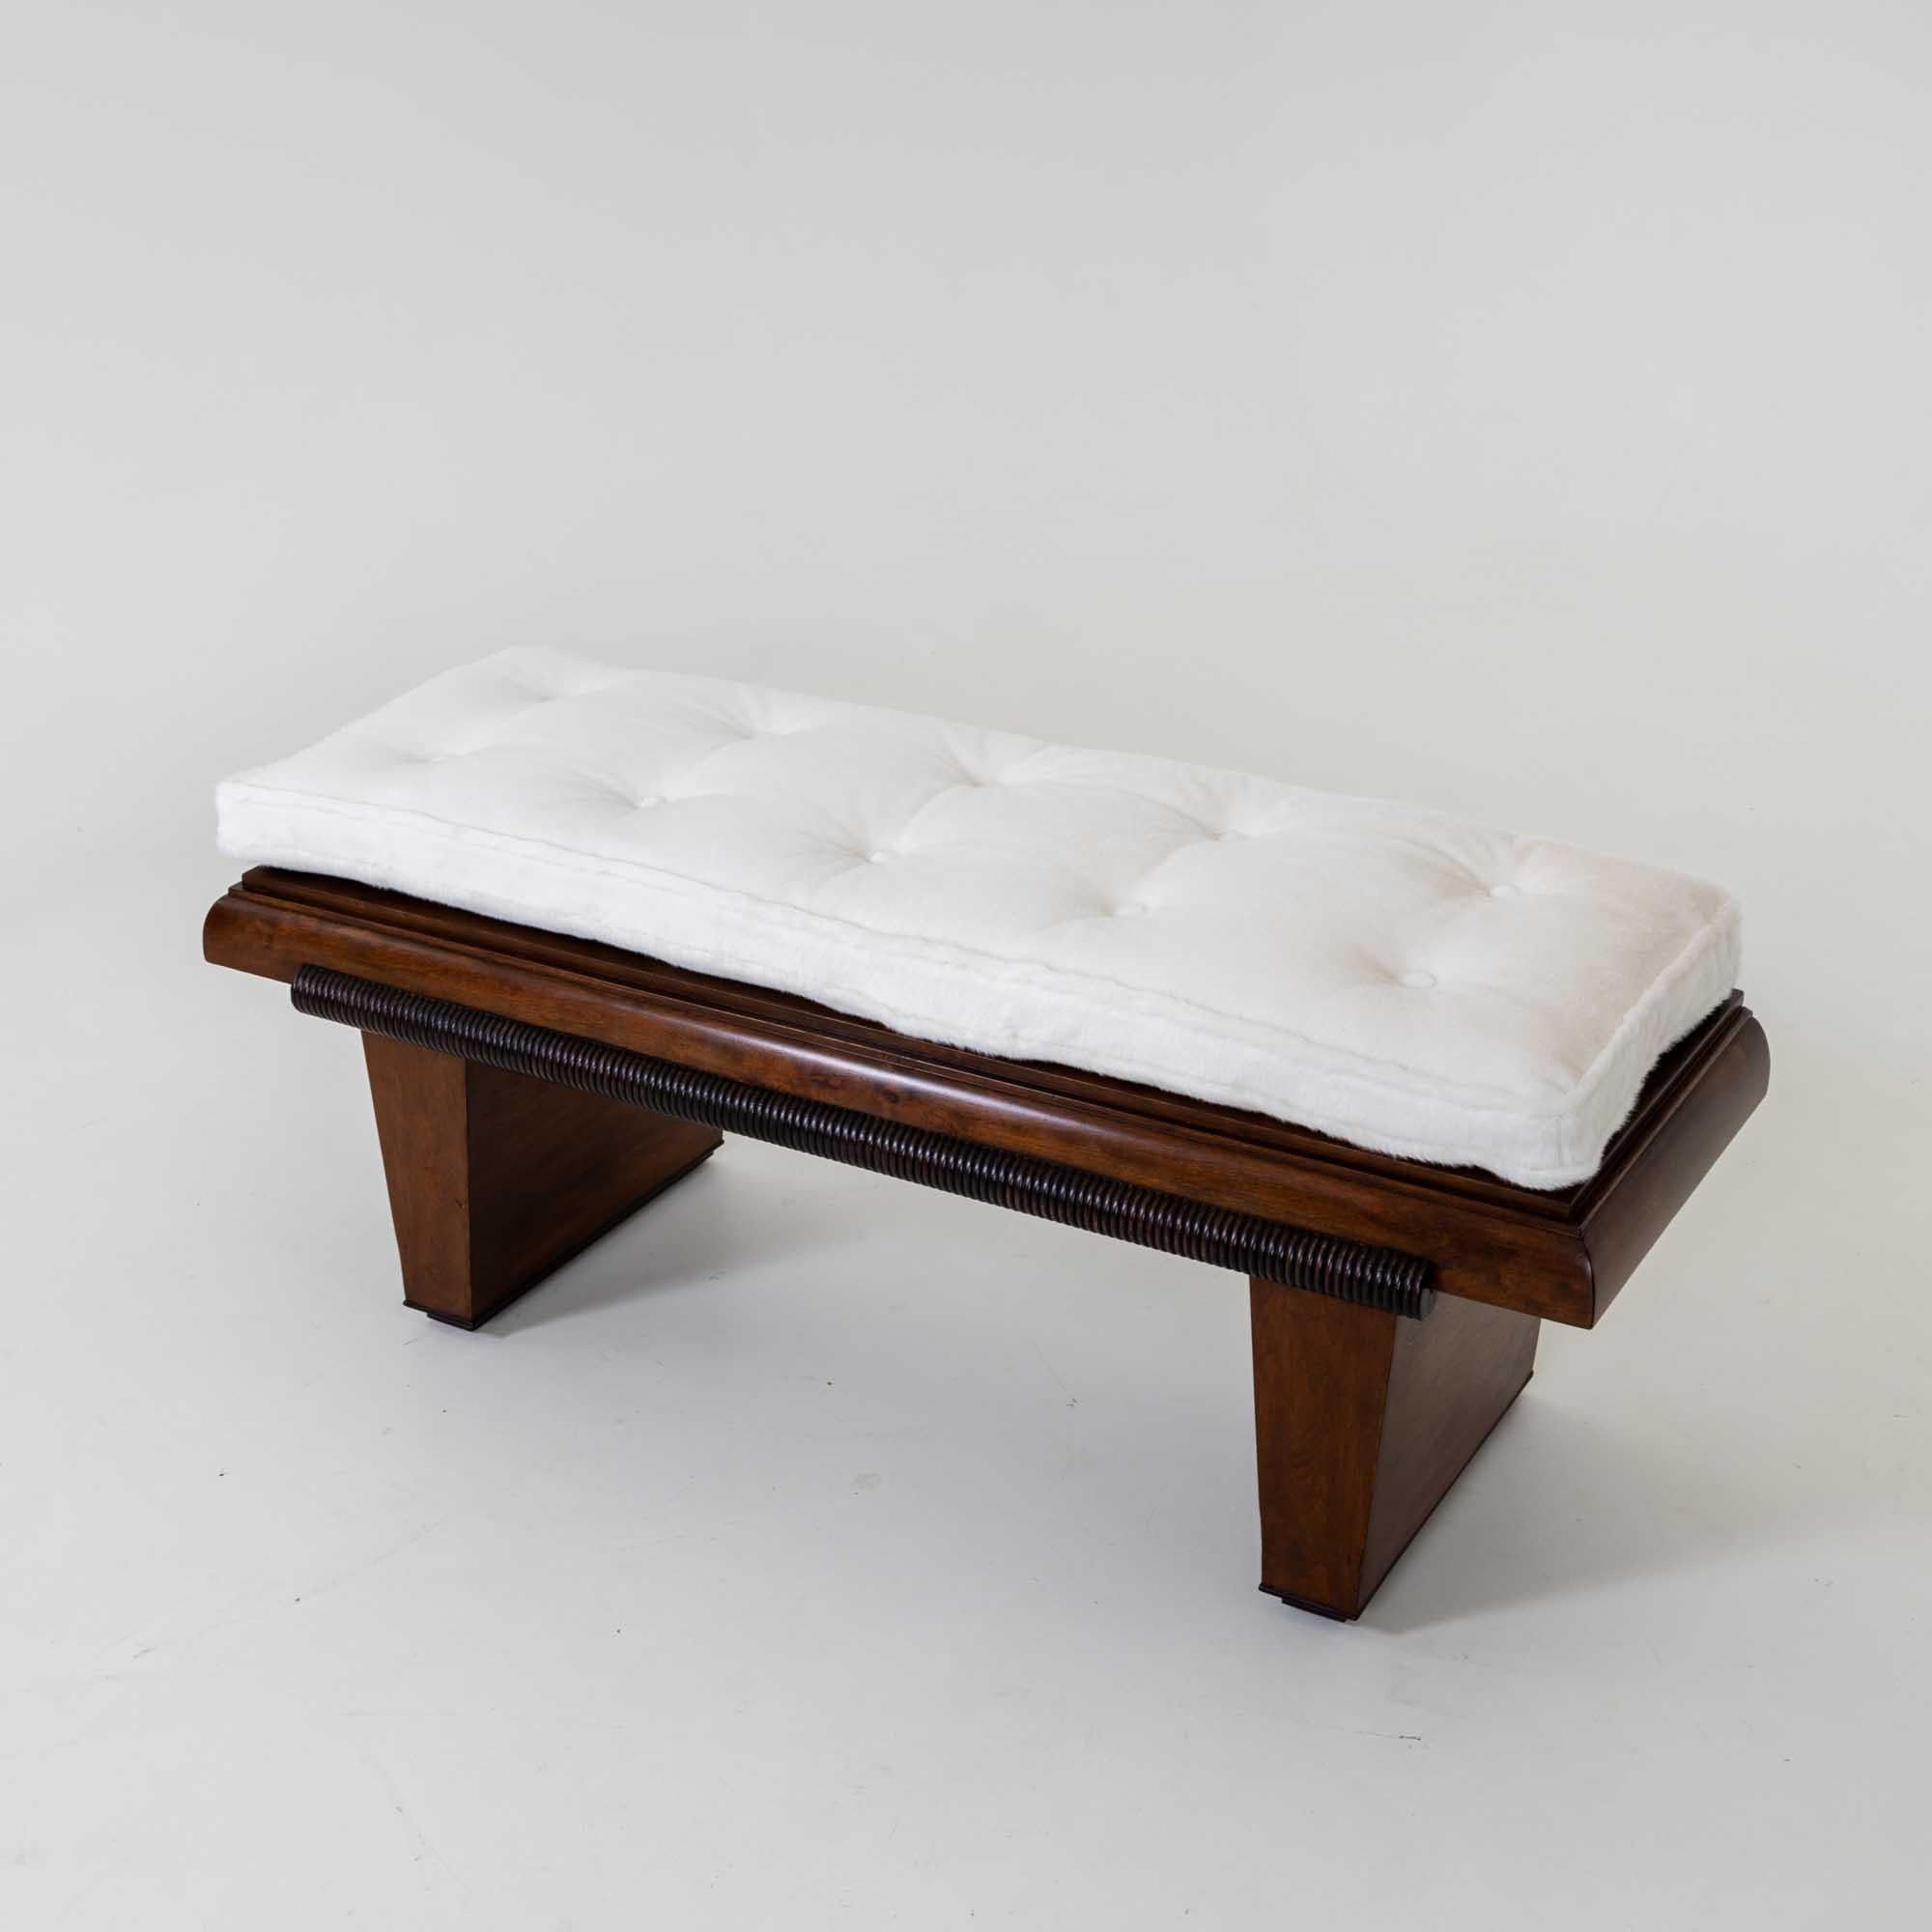 Italian Modernist bench attributed to Paolo Buffa.
Reupholstered cushion, crafted from walnut.